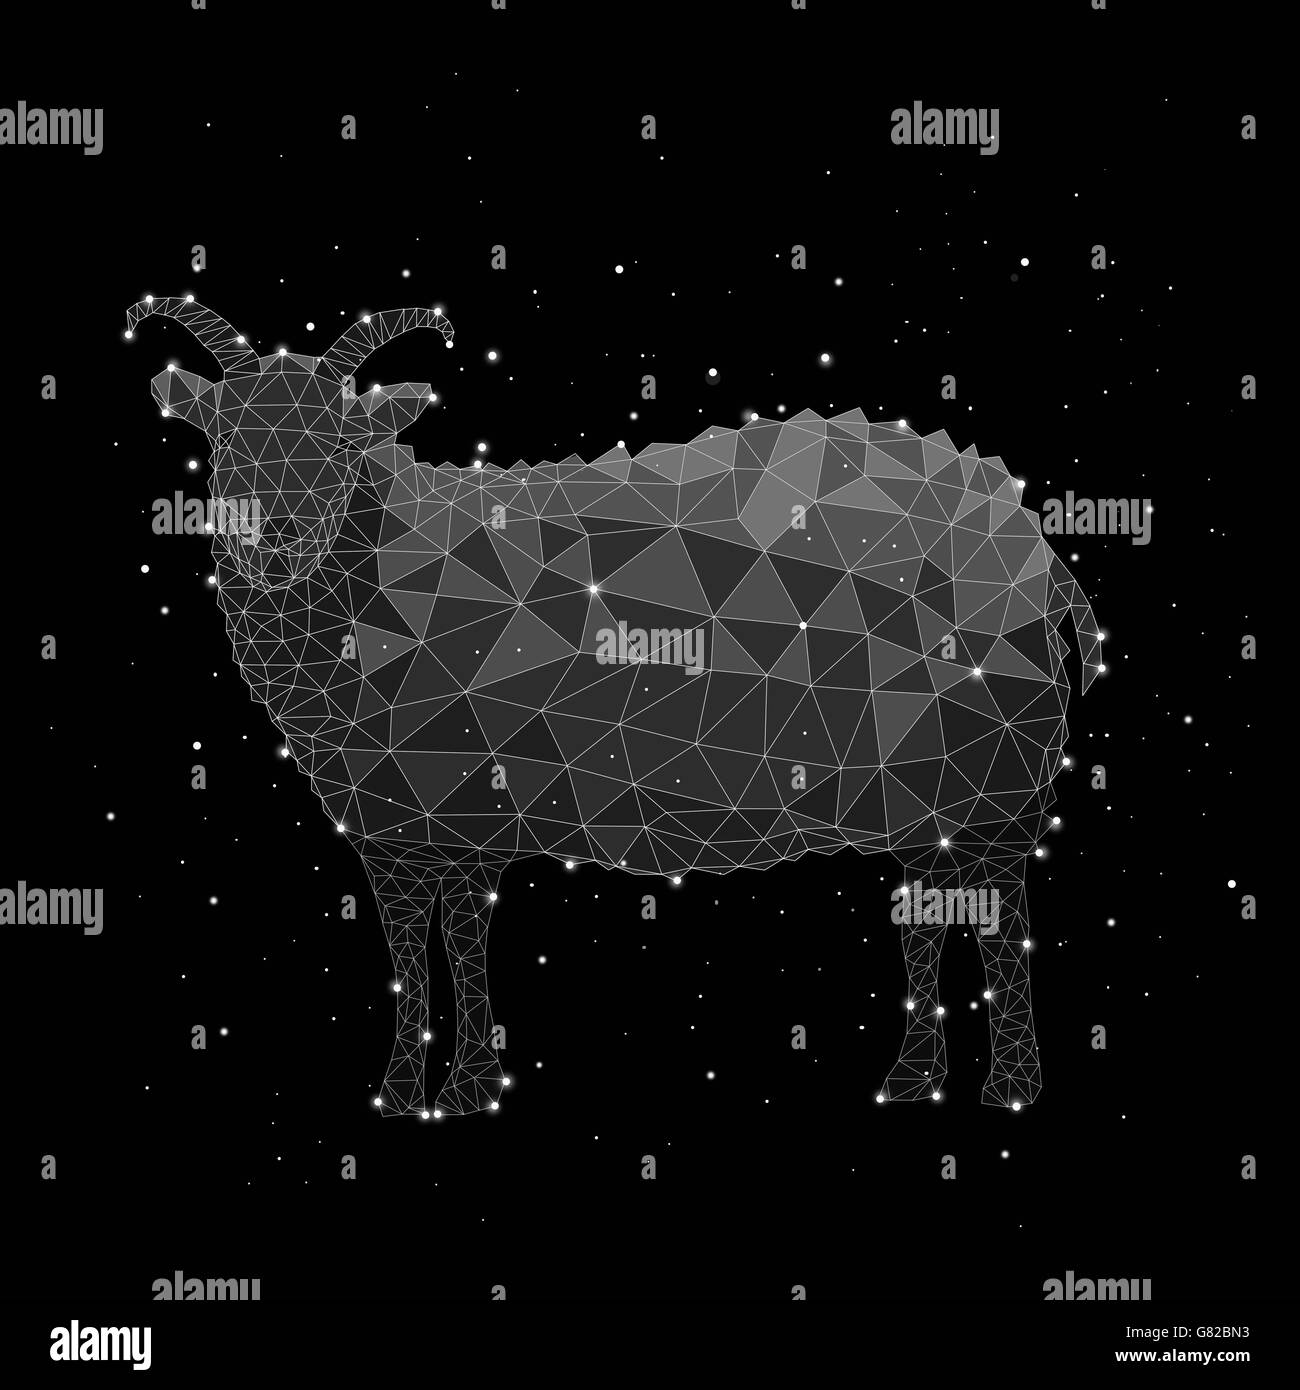 Digital composite image of constellation forming sheep against black background Stock Photo